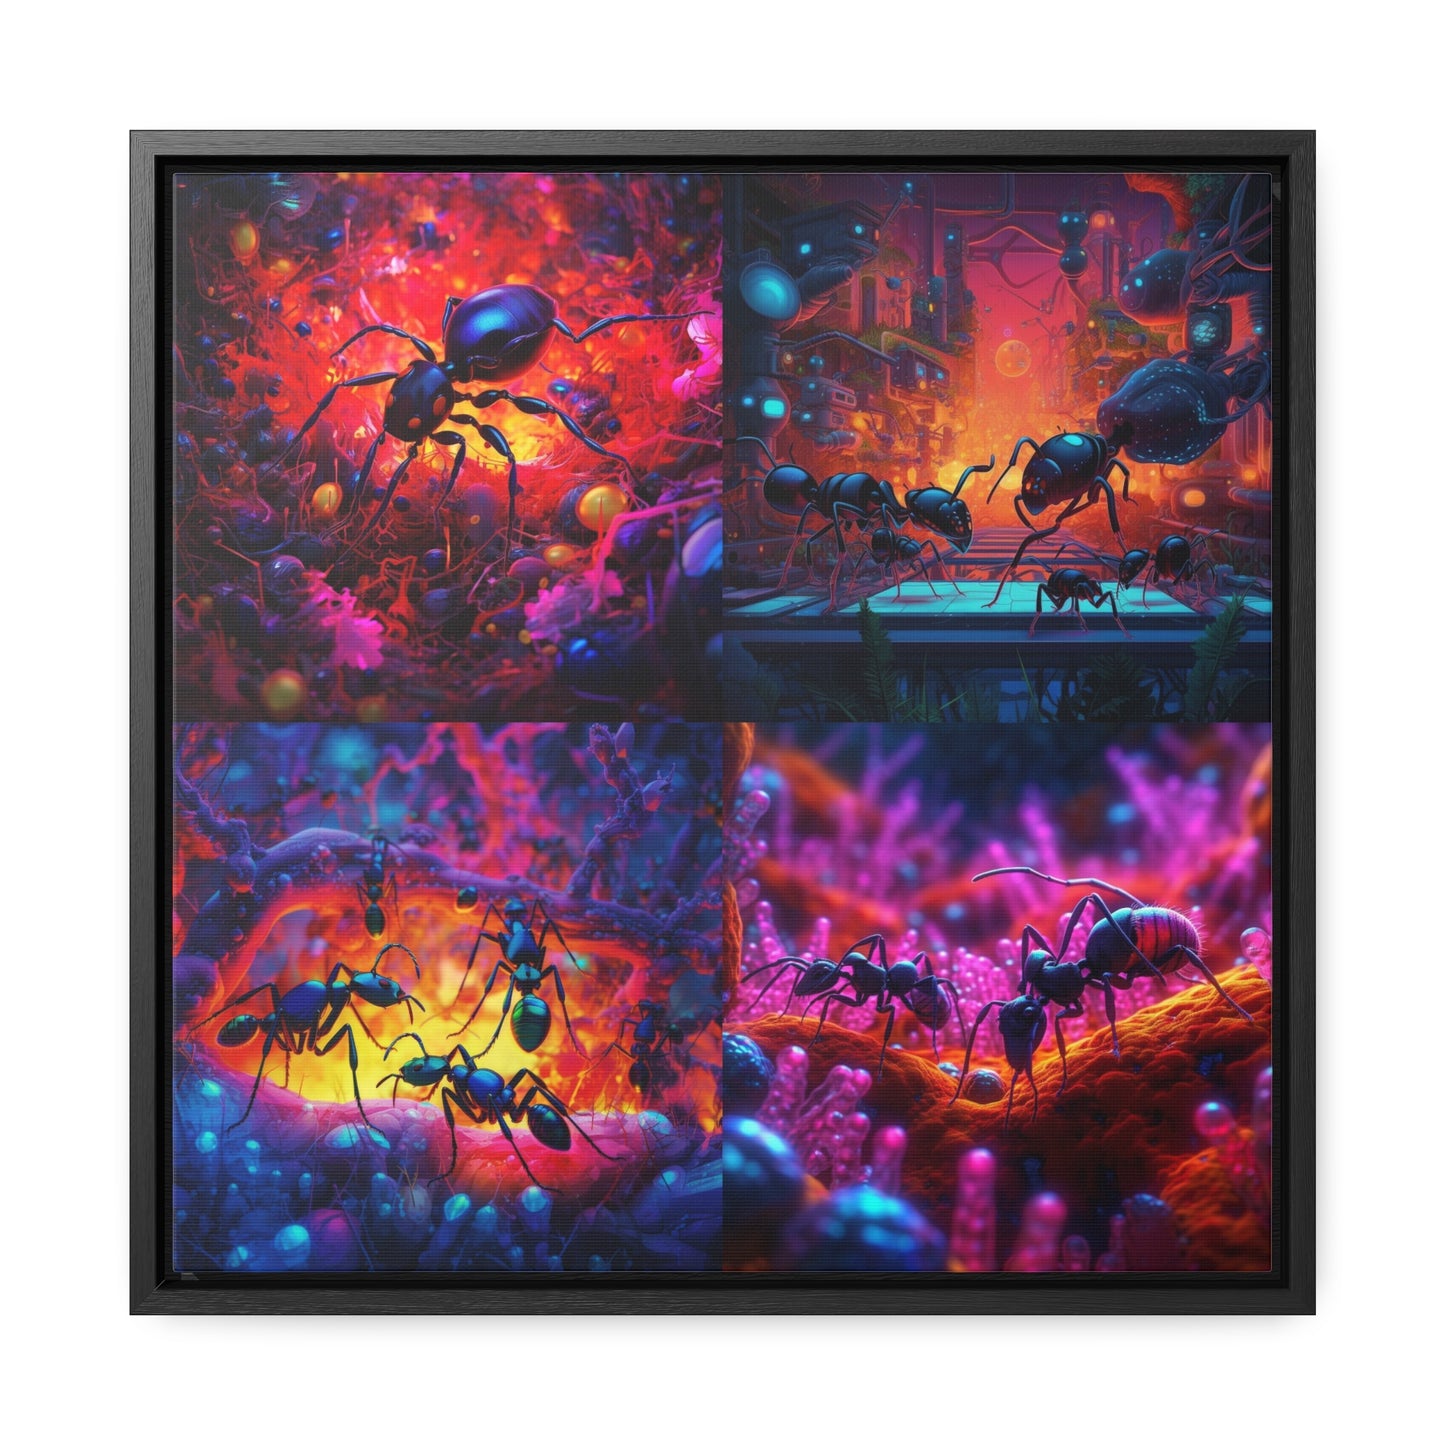 Gallery Canvas Wraps, Square Frame Ants Home 5